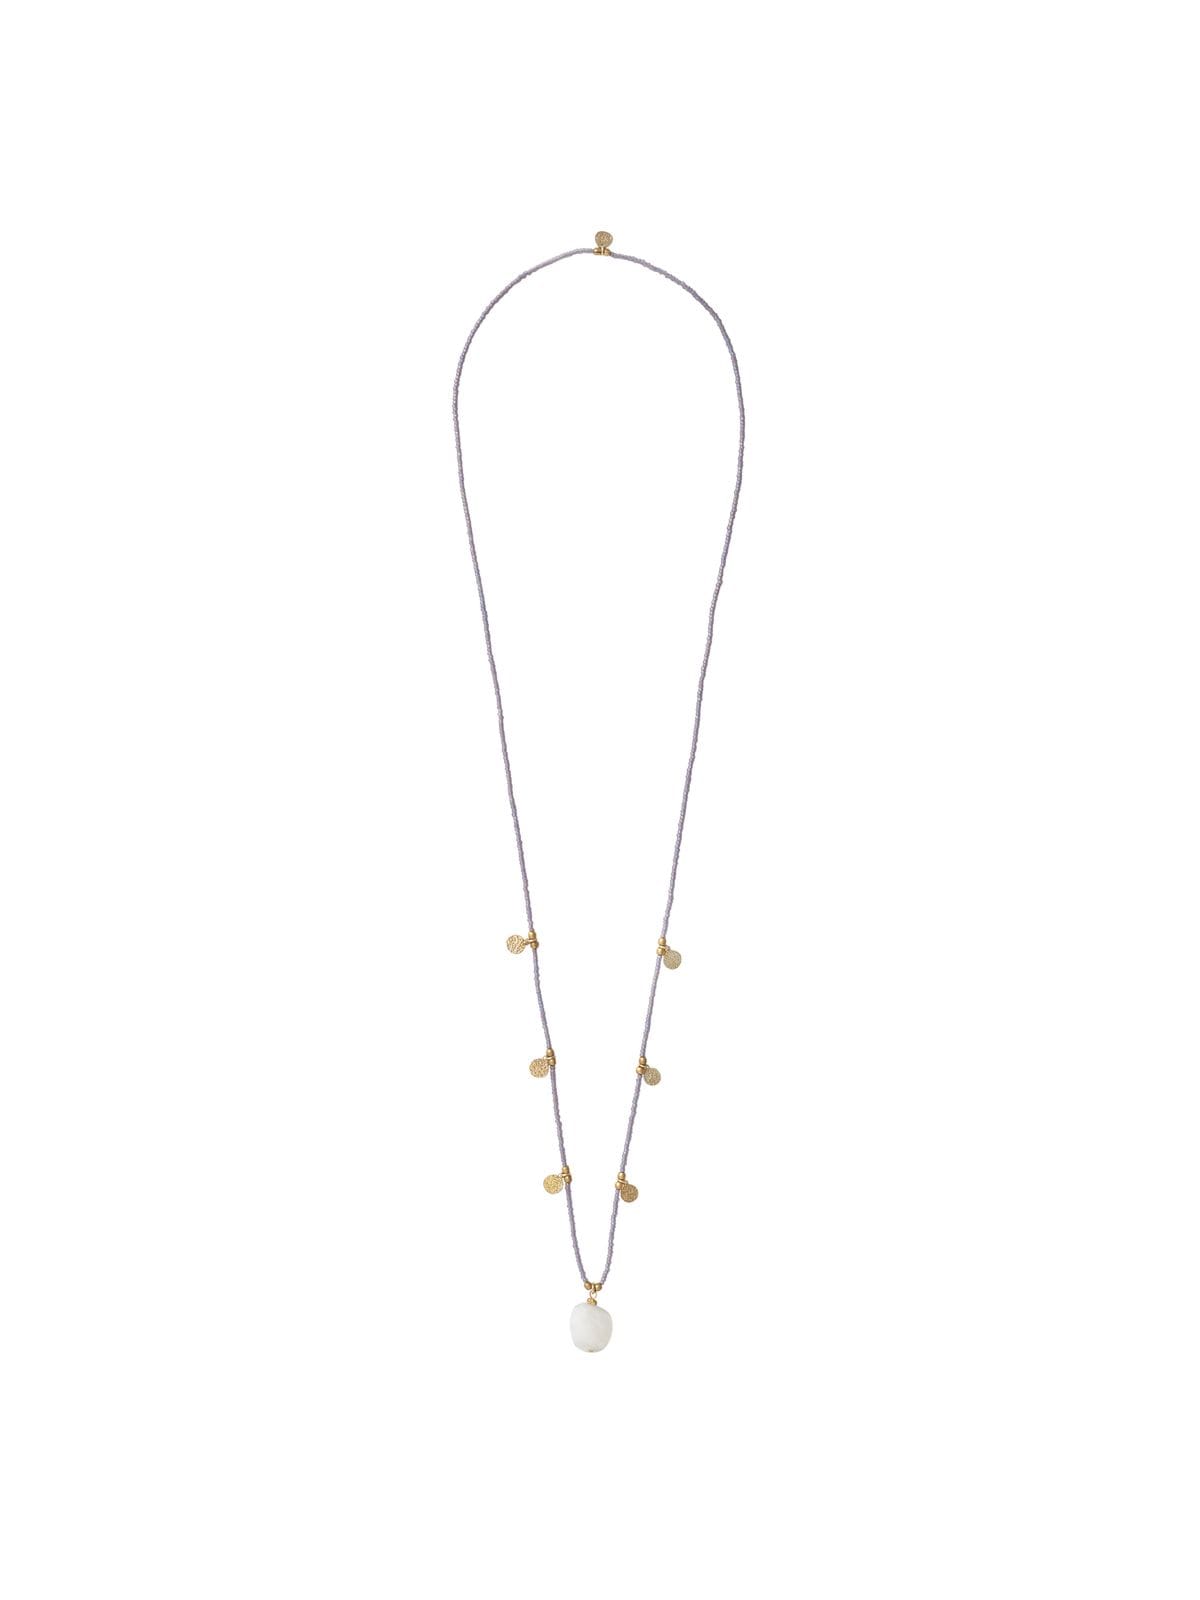 BL25414_1 - Charming Moonstone Gold Necklace_1200x1600